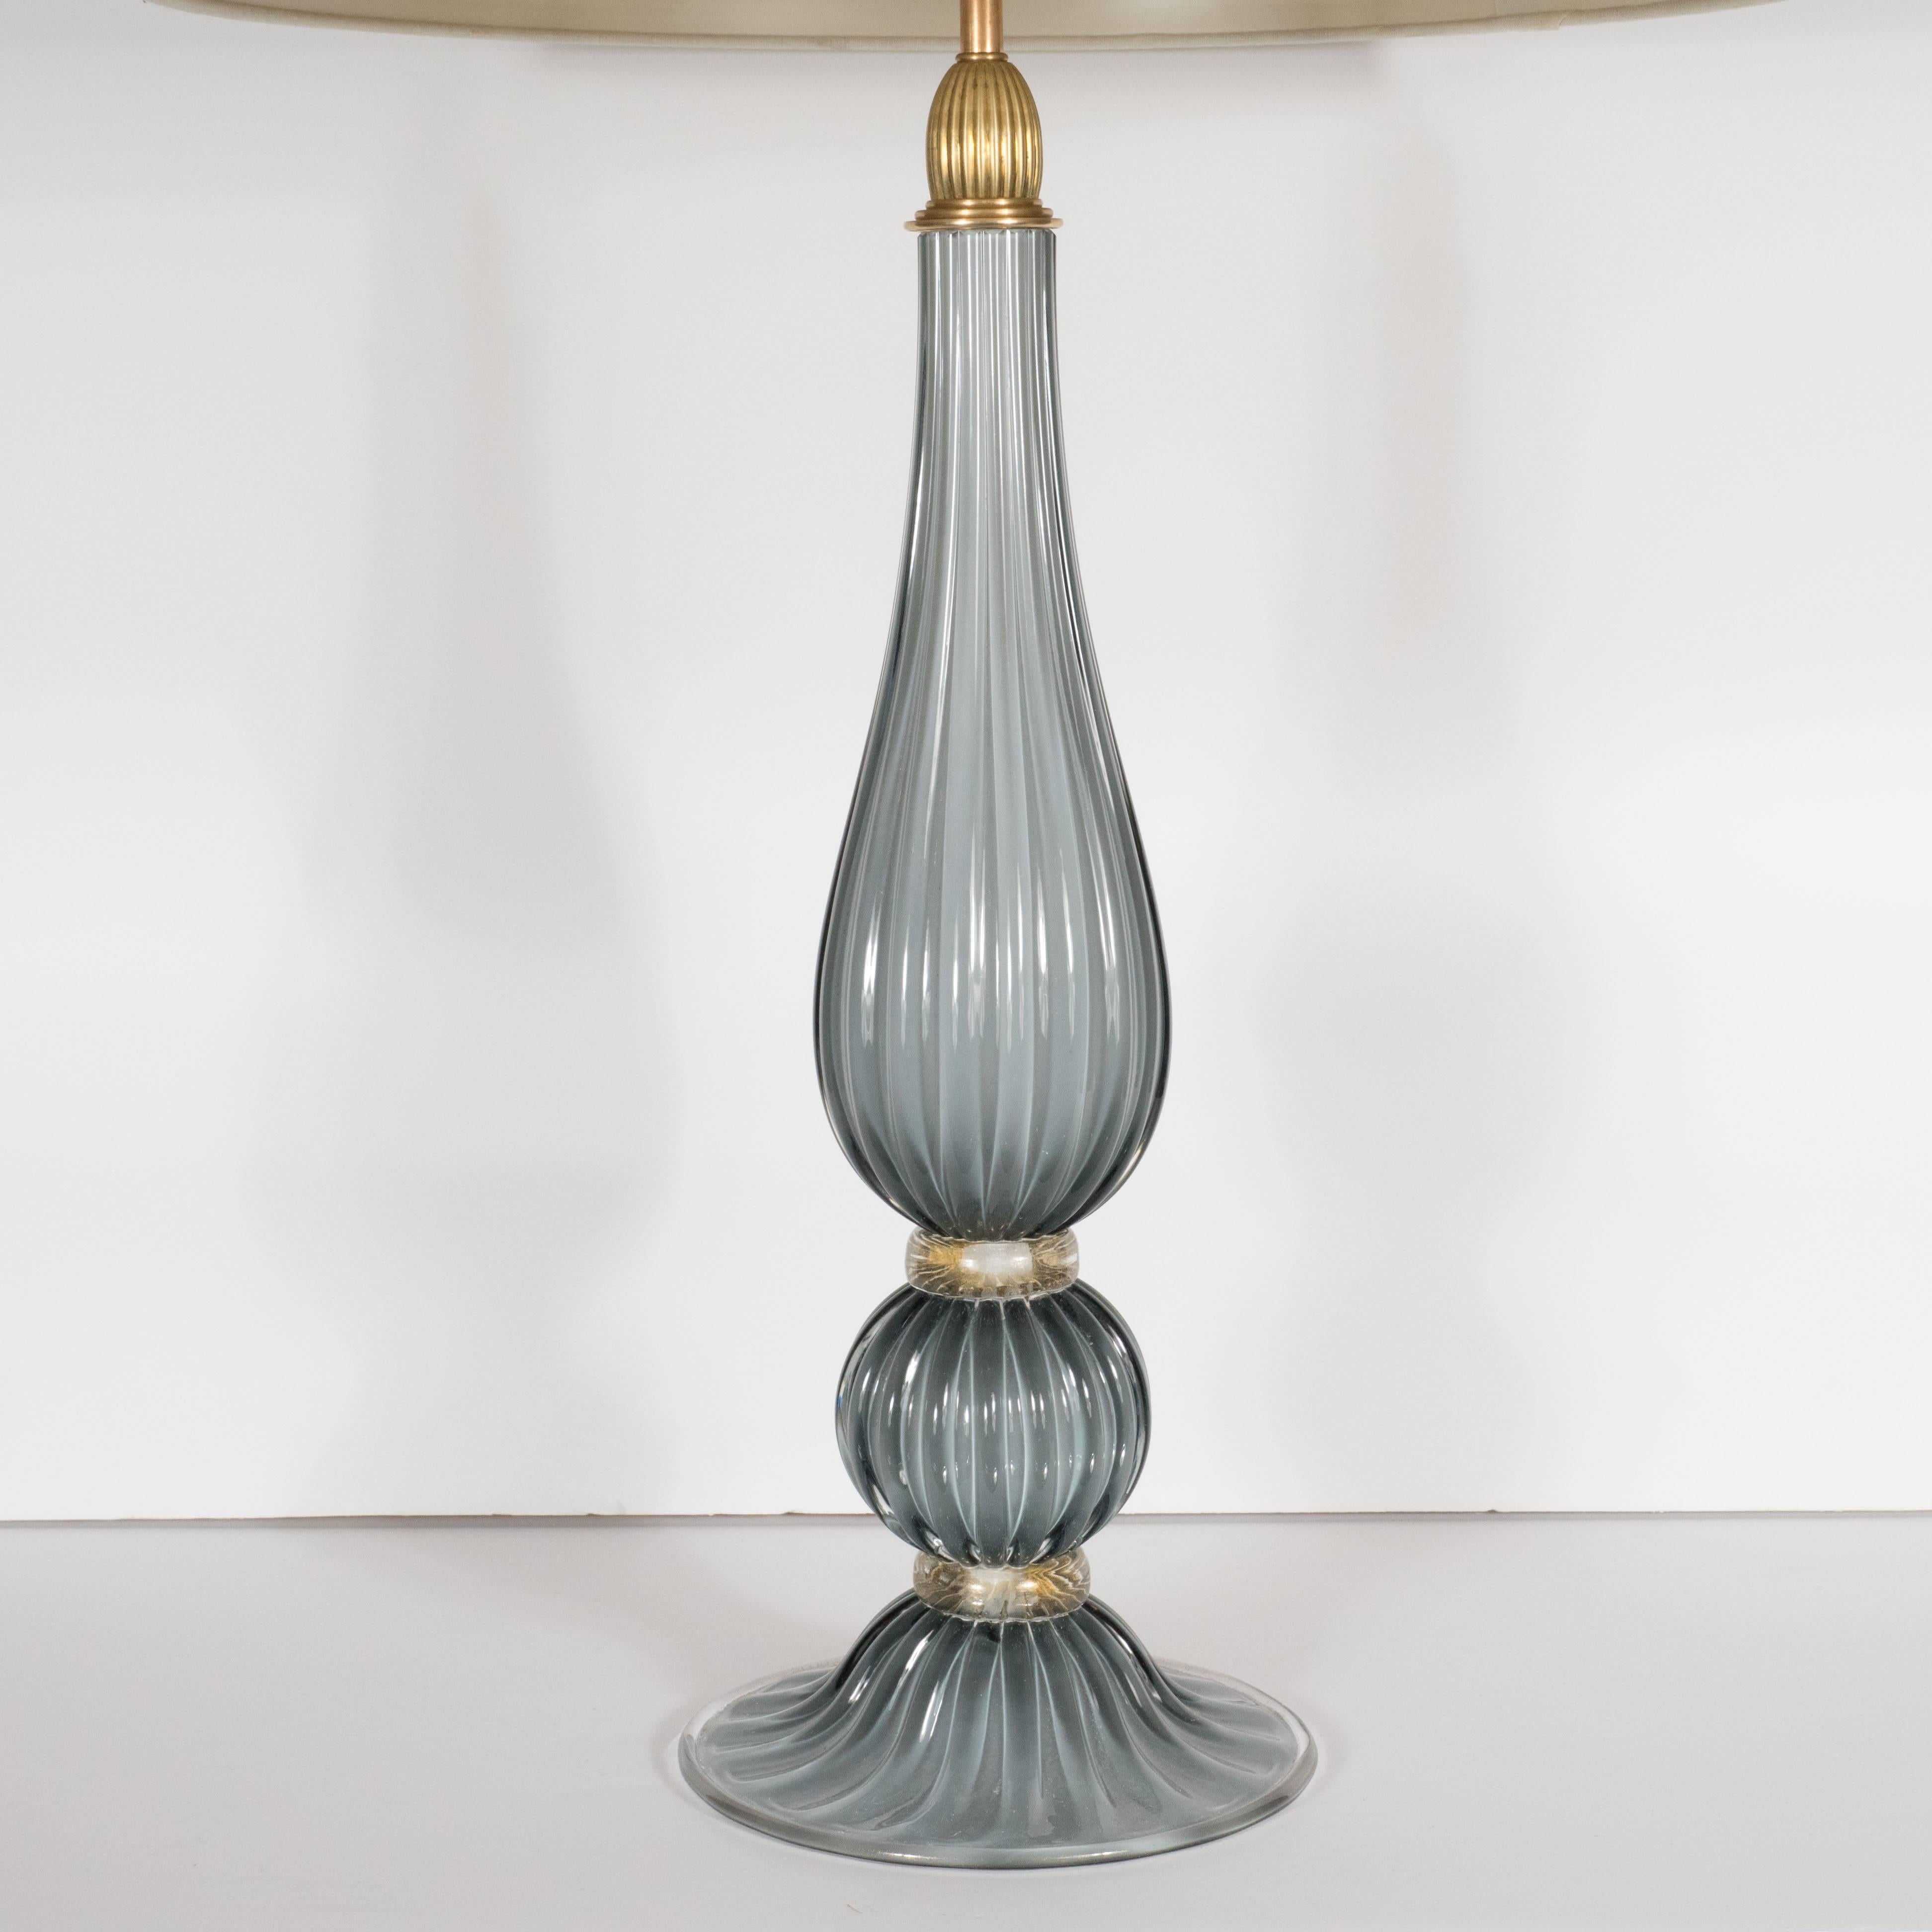 This refined pair of modernist table lamps were handblown in Murano, Italy- the islands off the coast of Venice renowned for centuries for their superlative glass production. They feature undulating forms in a smokey dove gray with an orbital form